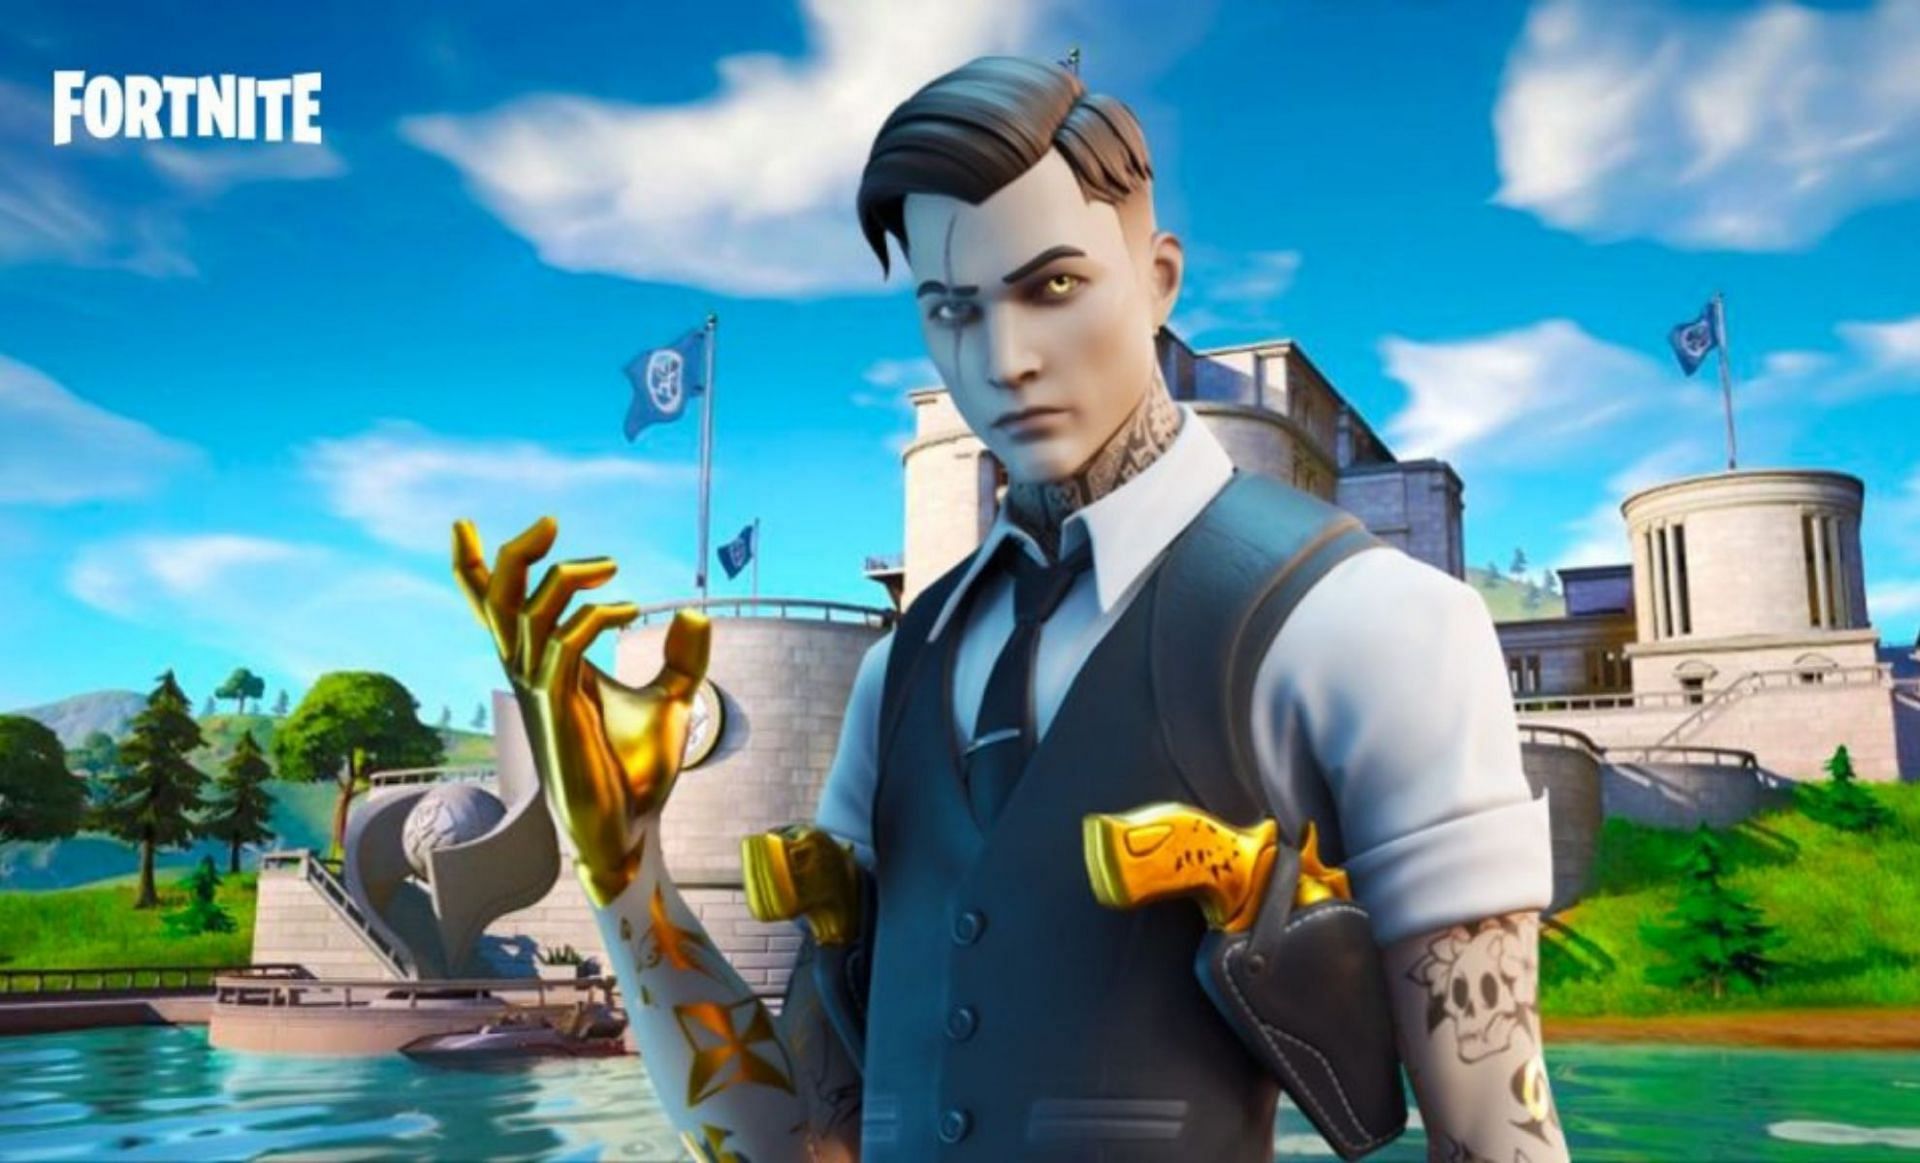 Midas has been a Fortnite favorite for a while (Image via Epic Games)